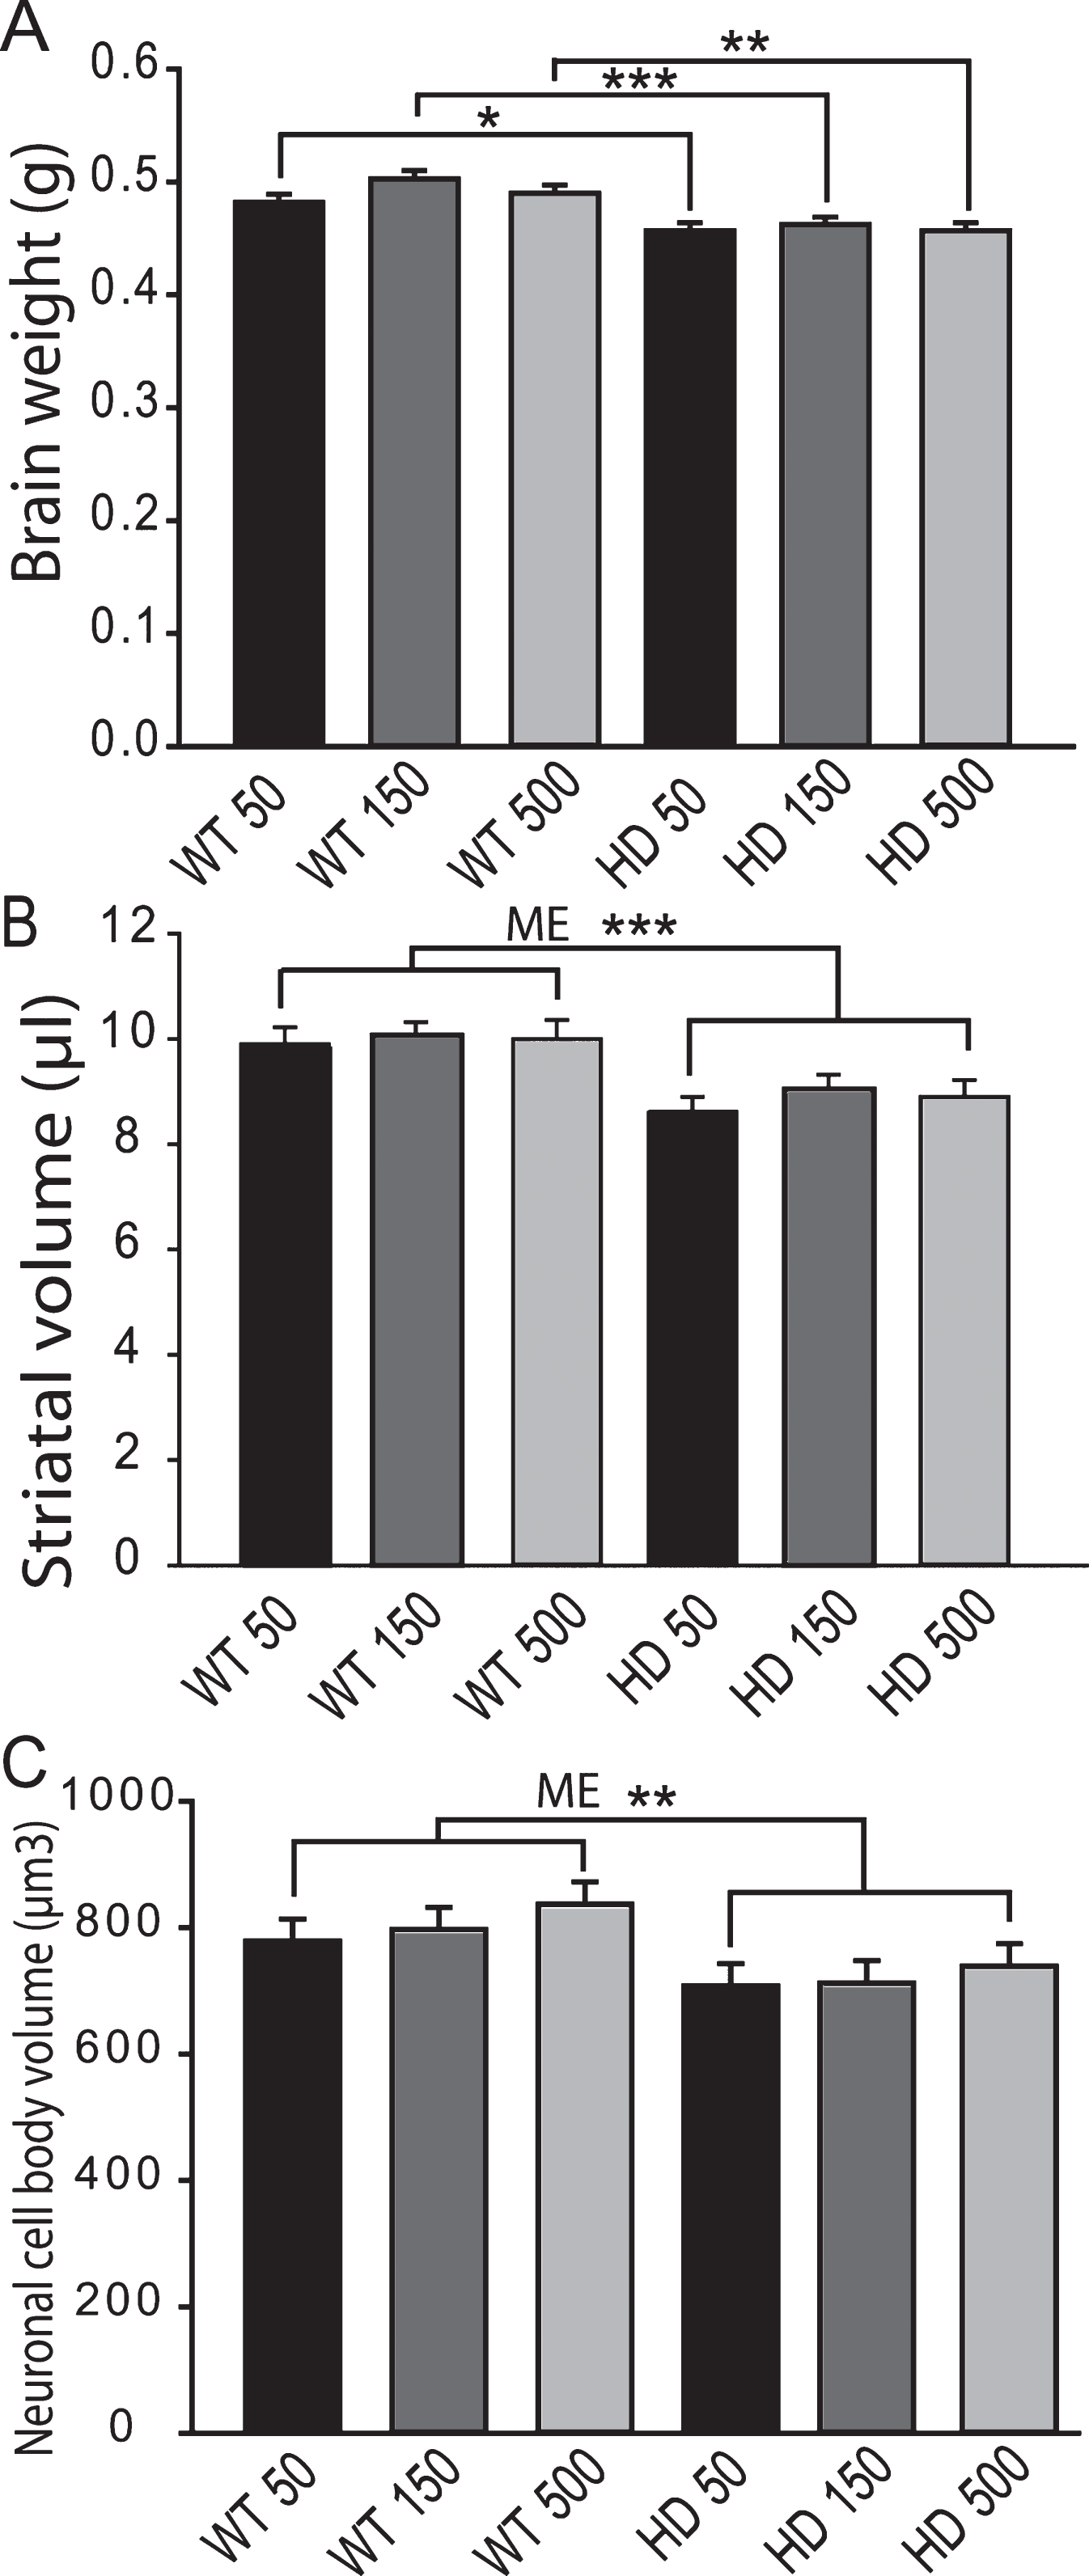 Adult iron supplementation does not exacerbate neurodegeneration markers in YAC128 HD mice. Mice were maintained on diets from 2–12 months of age. A. Brain weights of YAC128 HD and wild-type mice fed one of three custom iron diets. YAC128 mice have significantly decreased brain weights compared to wild-type litter-mates. Iron supplementation has no effect on brain weight in HD or wild-type mice. n = 12–15, B. Striatal volumes are decreased by HD but not by dietary iron level. There was a significant effect of genotype with YAC128 HD mice having lower striatal volumes across all iron groups, n = 4–6, C. Striatal cell body volumes are not altered by dietary iron intake level in YAC128 HD or wild-type mice. There was a significant effect of genotype with YAC128 HD mice having lower cell volumes across all iron groups. ME = main effect comparison. P-values: *p < 0.05, **p < 0.01, ***p < 0.001, n = 4–6.